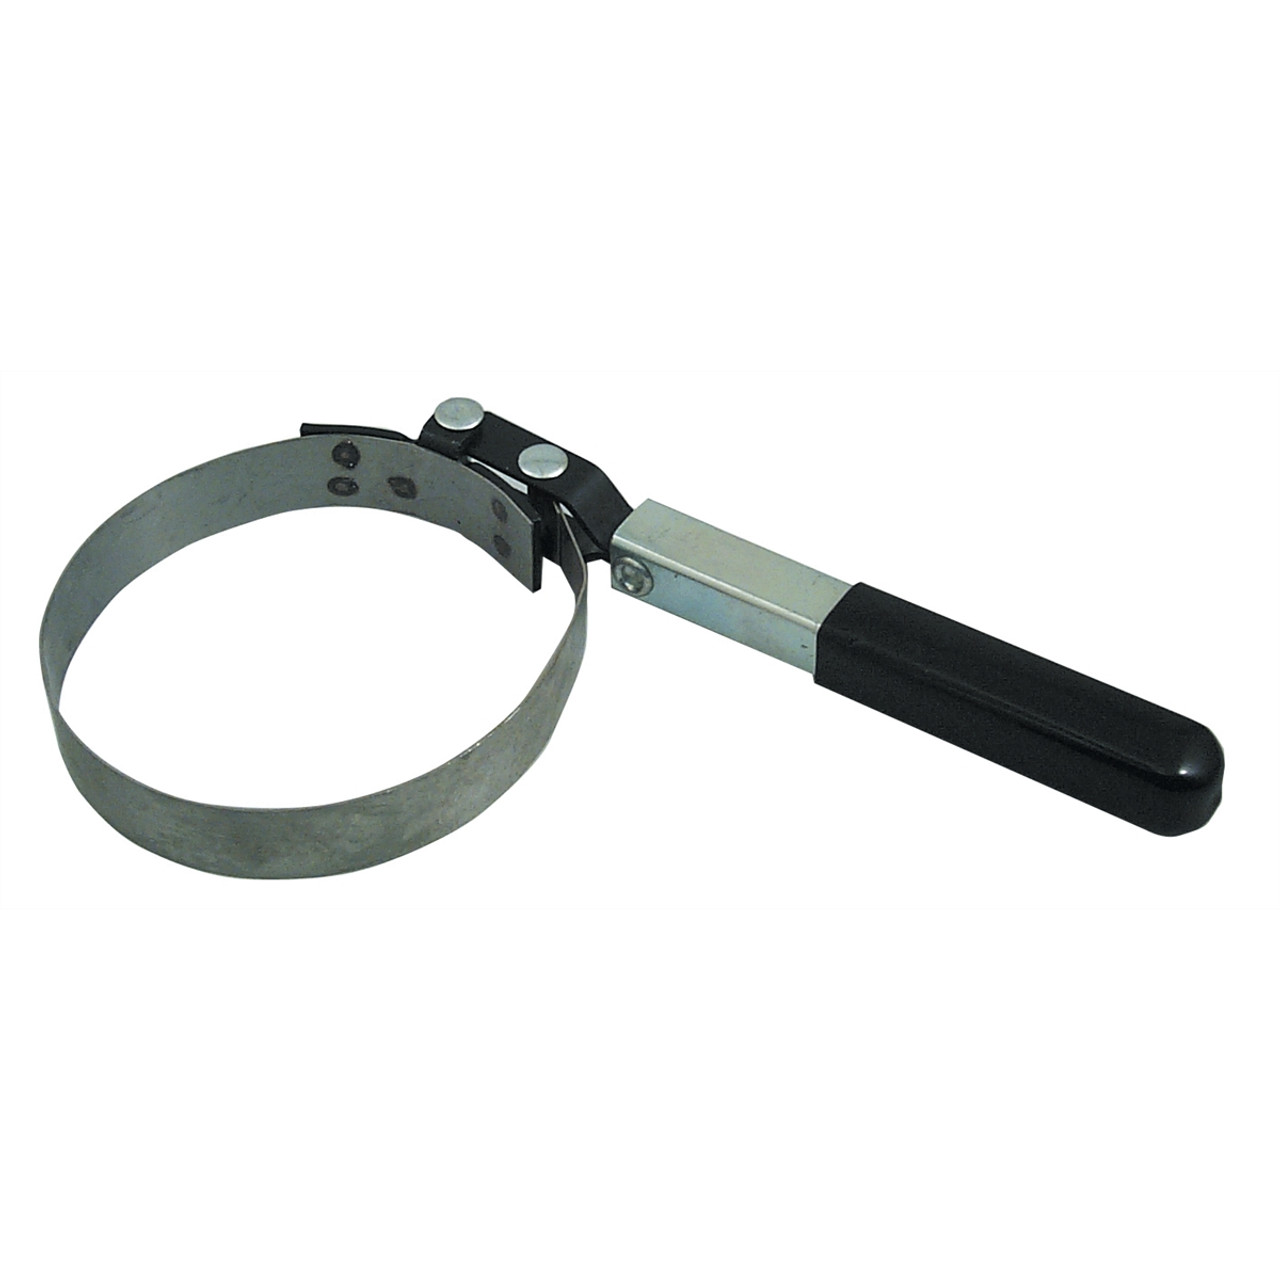 Swivel Grip Oil Fuel Filter Wrench (LIS54400)